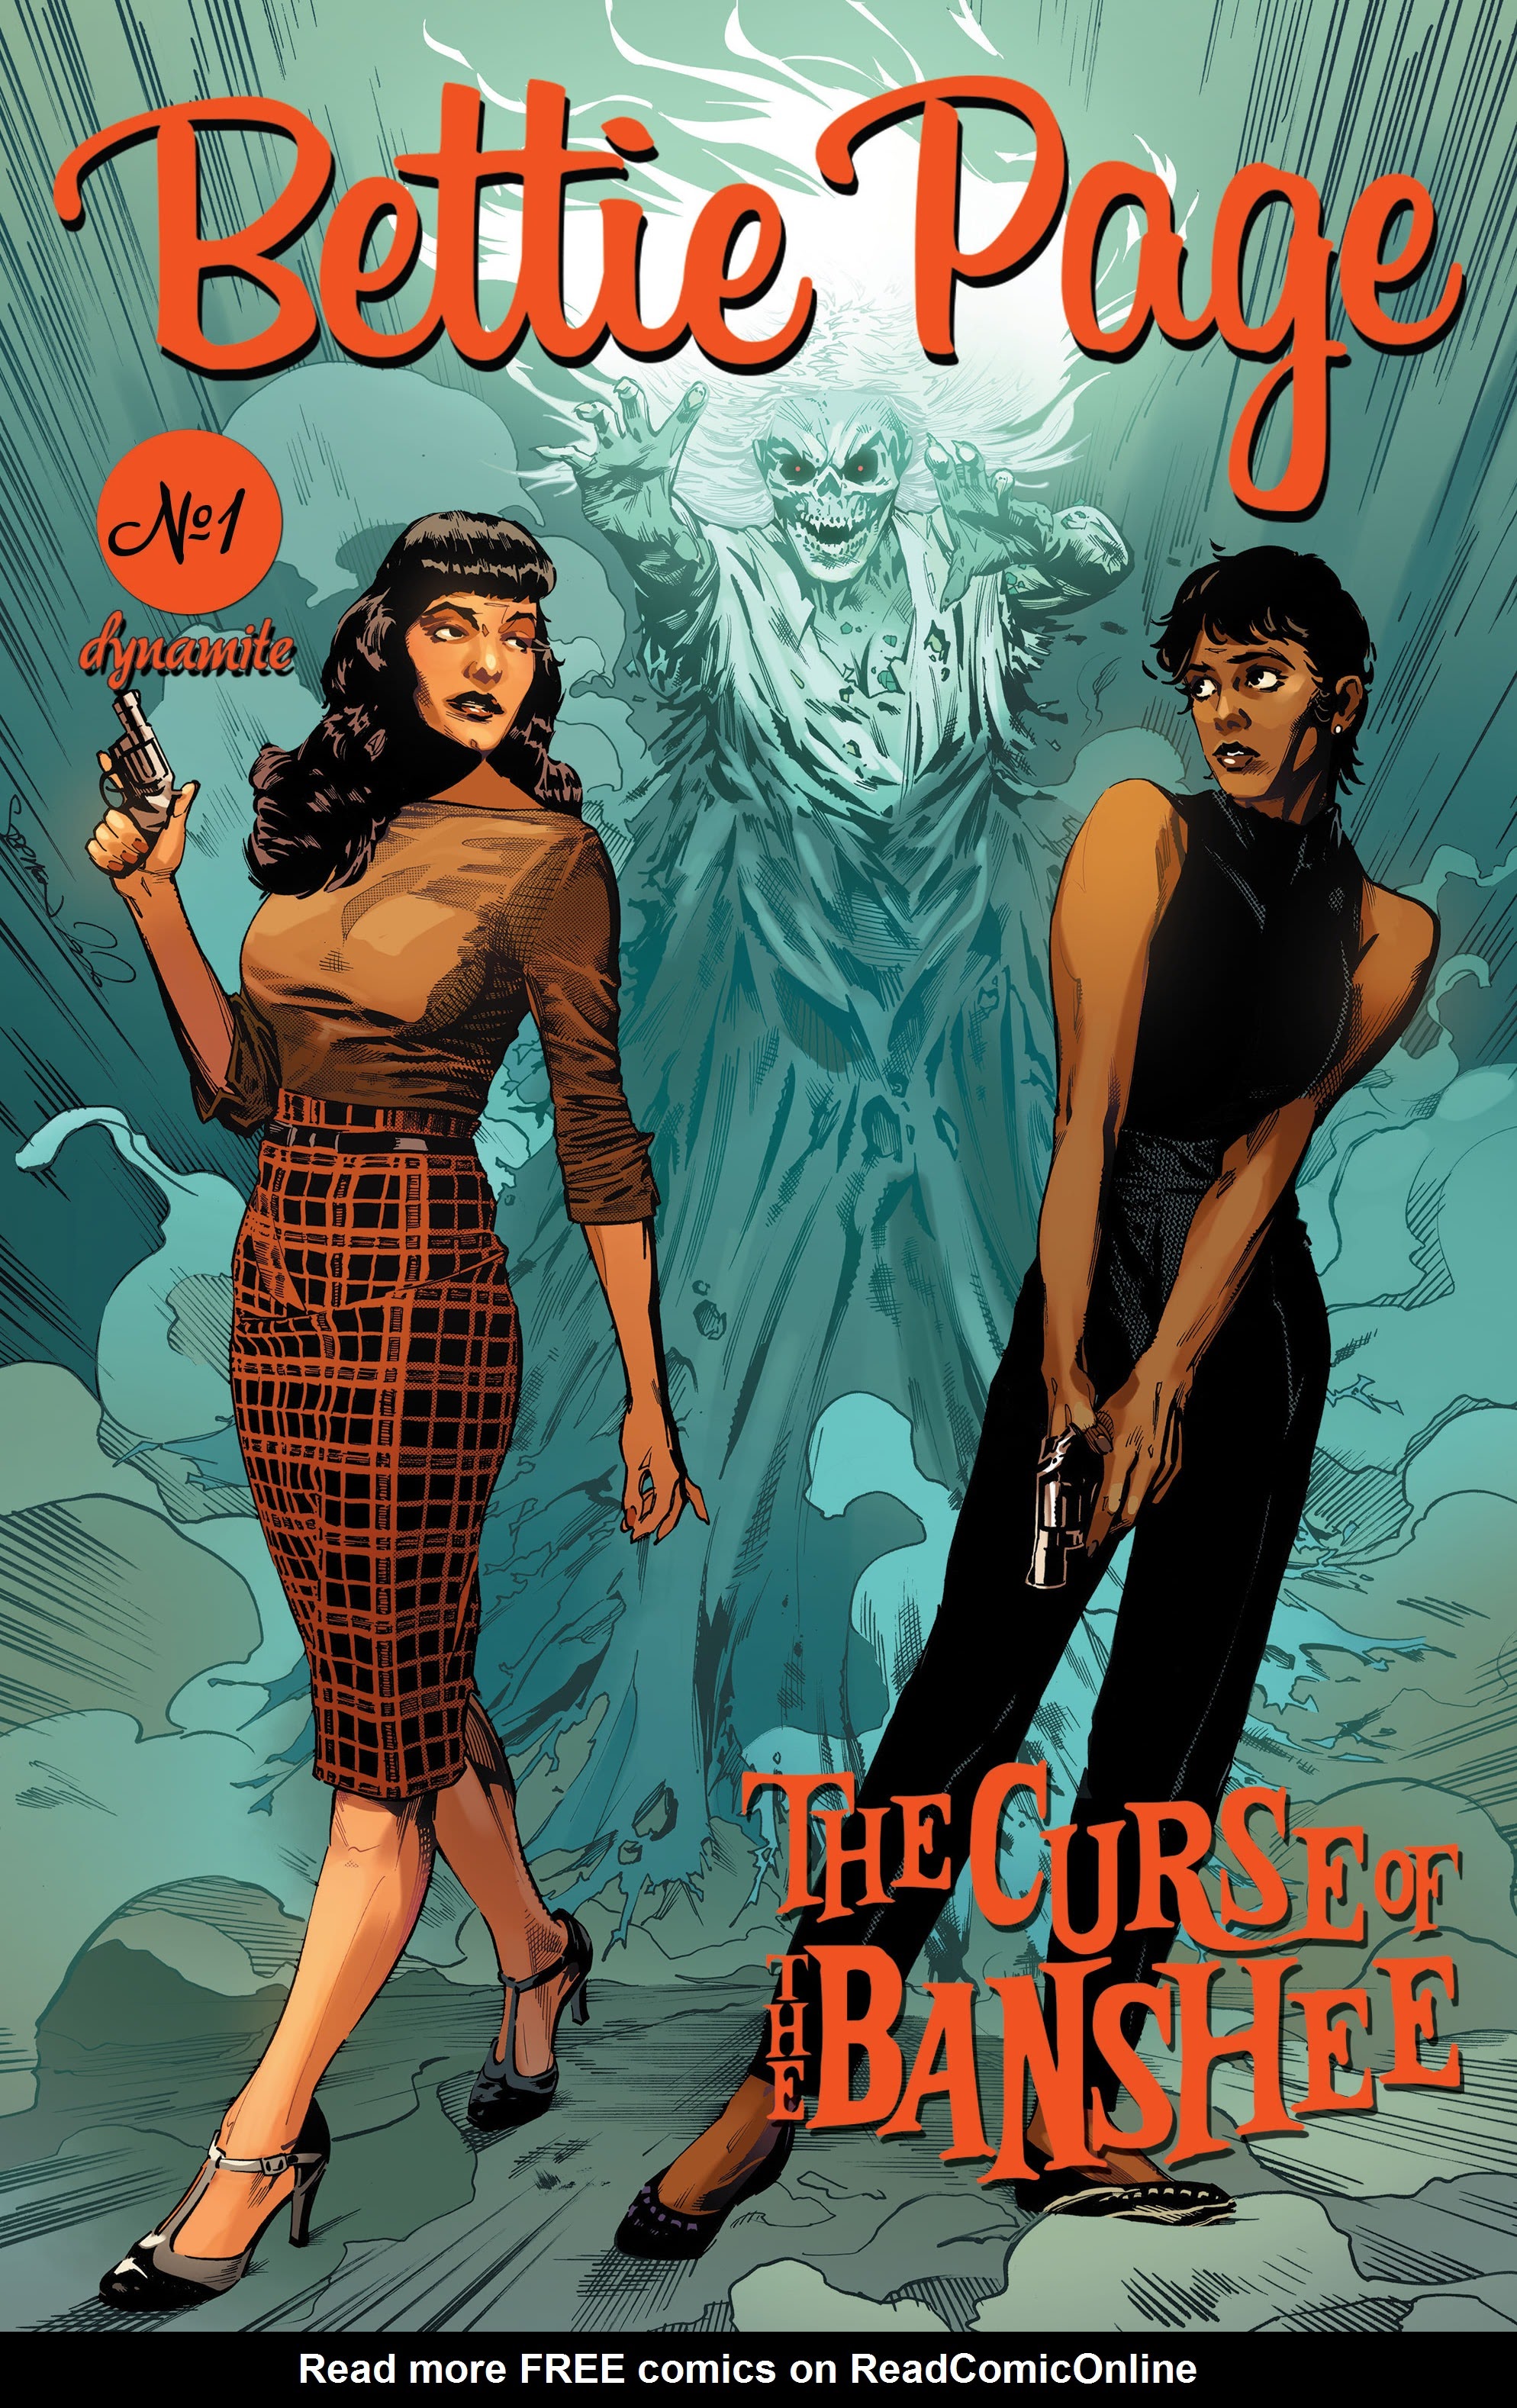 Read online Bettie Page & The Curse of the Banshee comic -  Issue #1 - 3